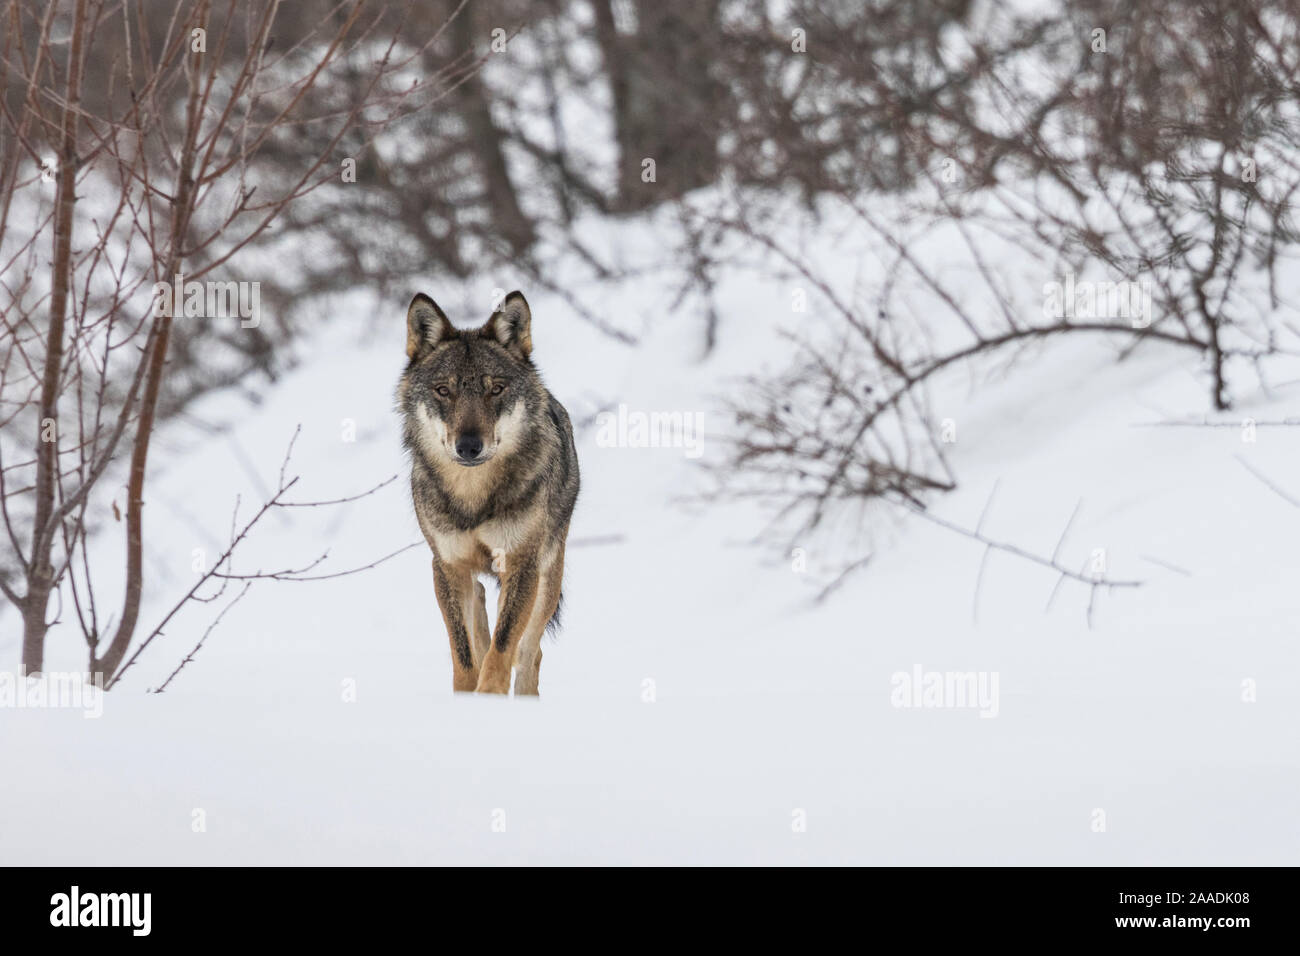 Wild Apennine wolf (Canis lupus italicus) in snowy landscape. Central Apennines, Abruzzo, Italy. February. Italian endemic subspecies. Stock Photo